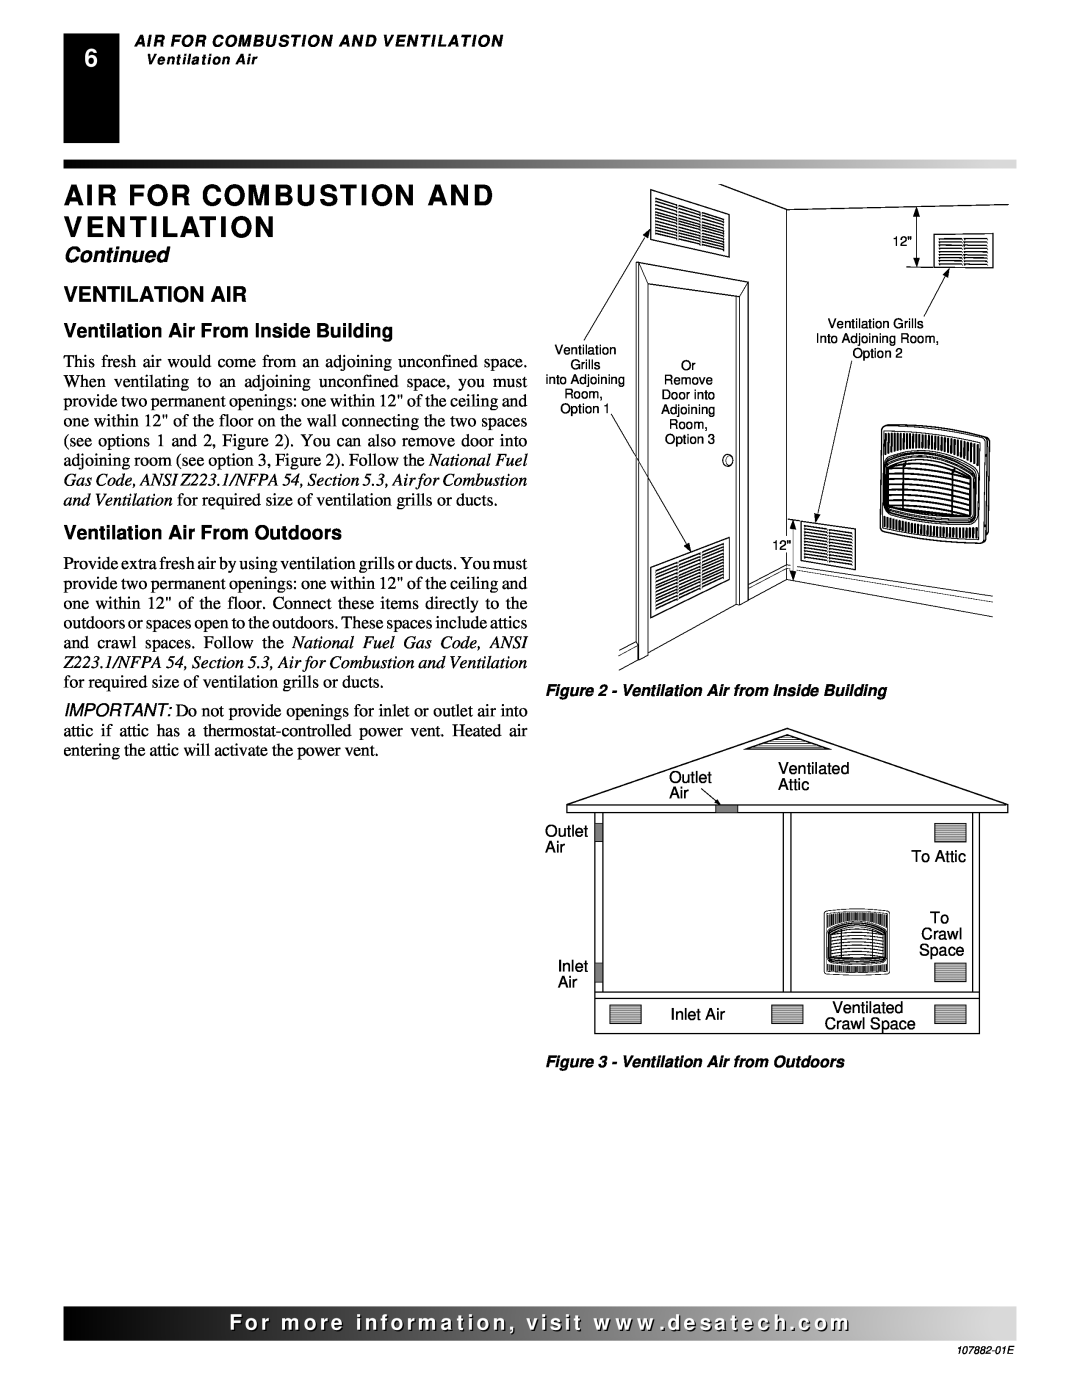 Desa Tech CBP20, CBN20T Air For Combustion And Ventilation, Continued, For..com, Ventilation Air From Inside Building 